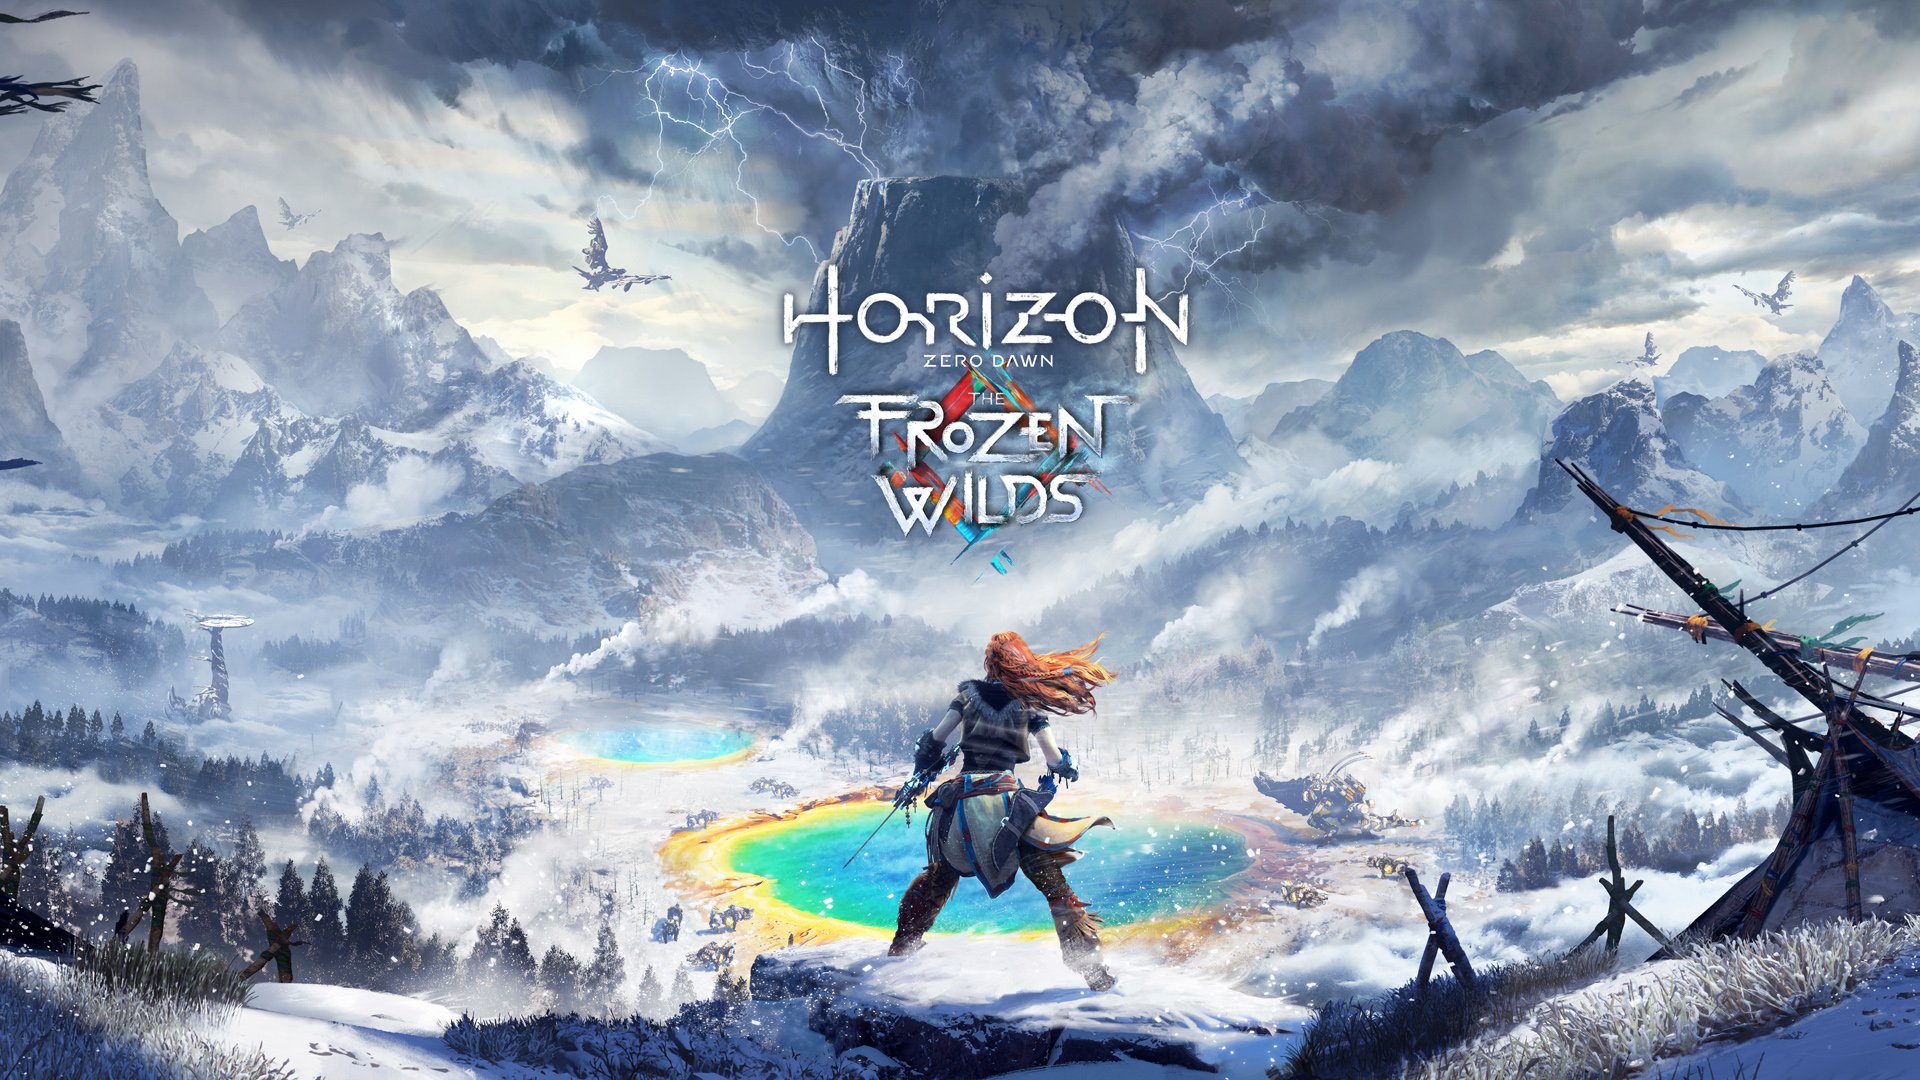 Supplement review The Frozen Wilds for the game Zero Dawn Horizon